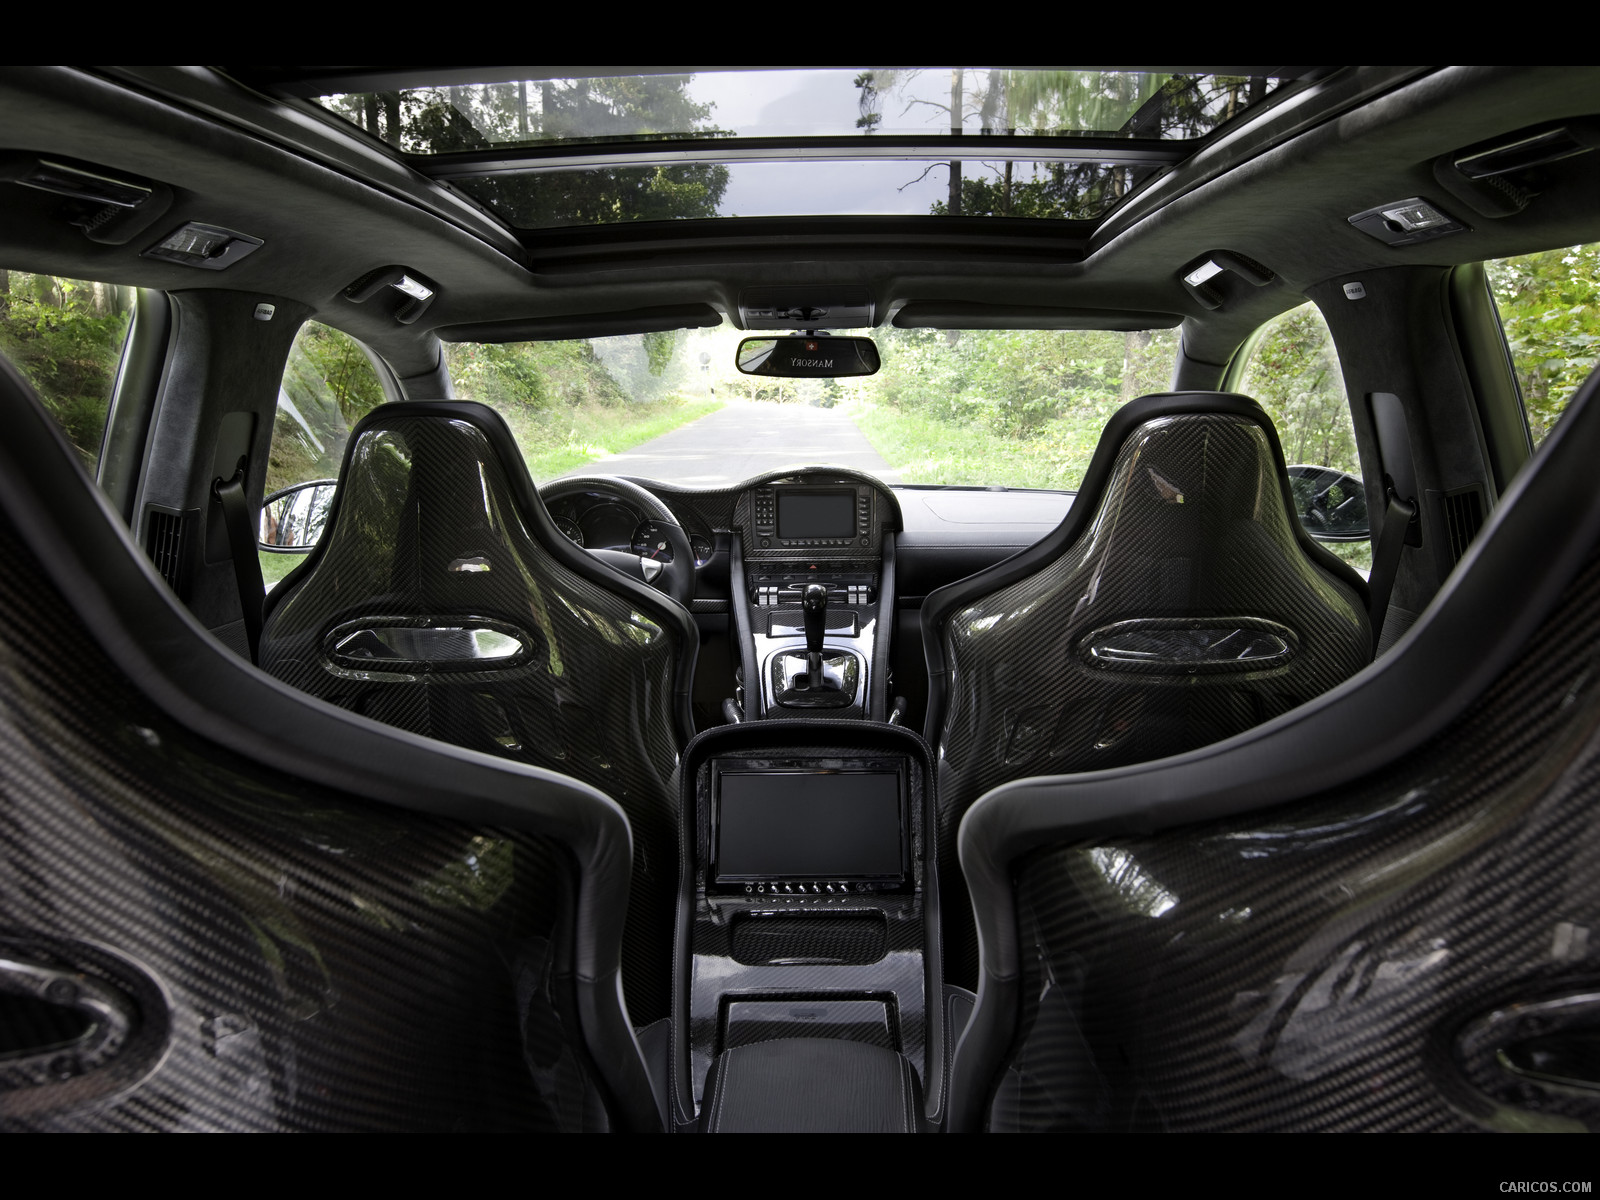 2009 Mansory Chopster based on Porsche Cayenne Turbo S  - Interior, #26 of 38